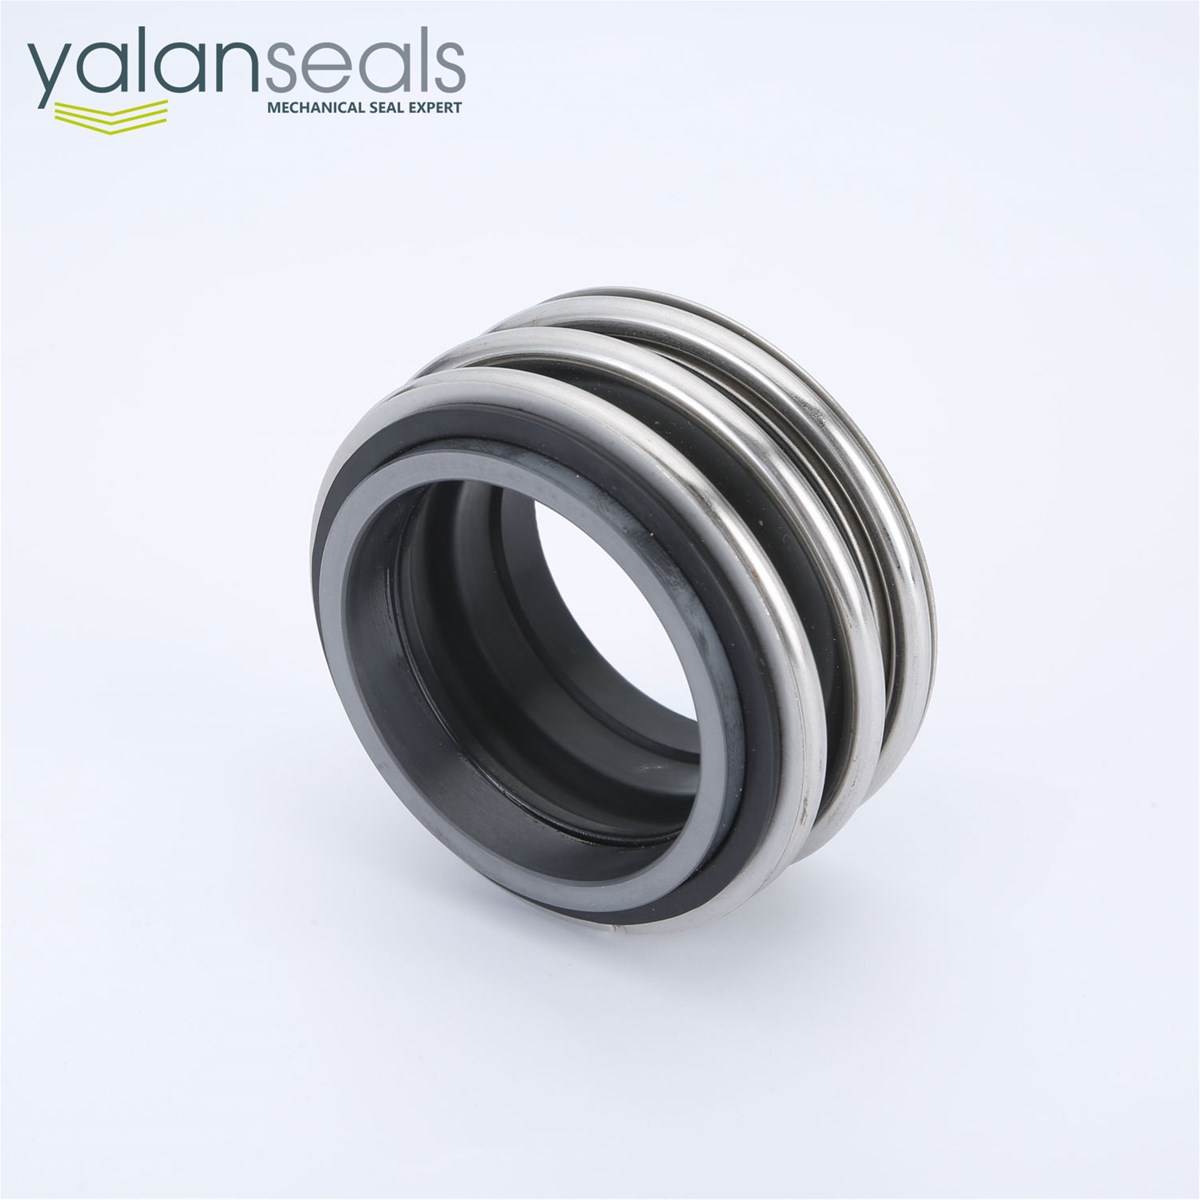 MG1 AKA 109 Mechanical Seal for Centrifugal Pumps Submerged Motors and Piping Pumps